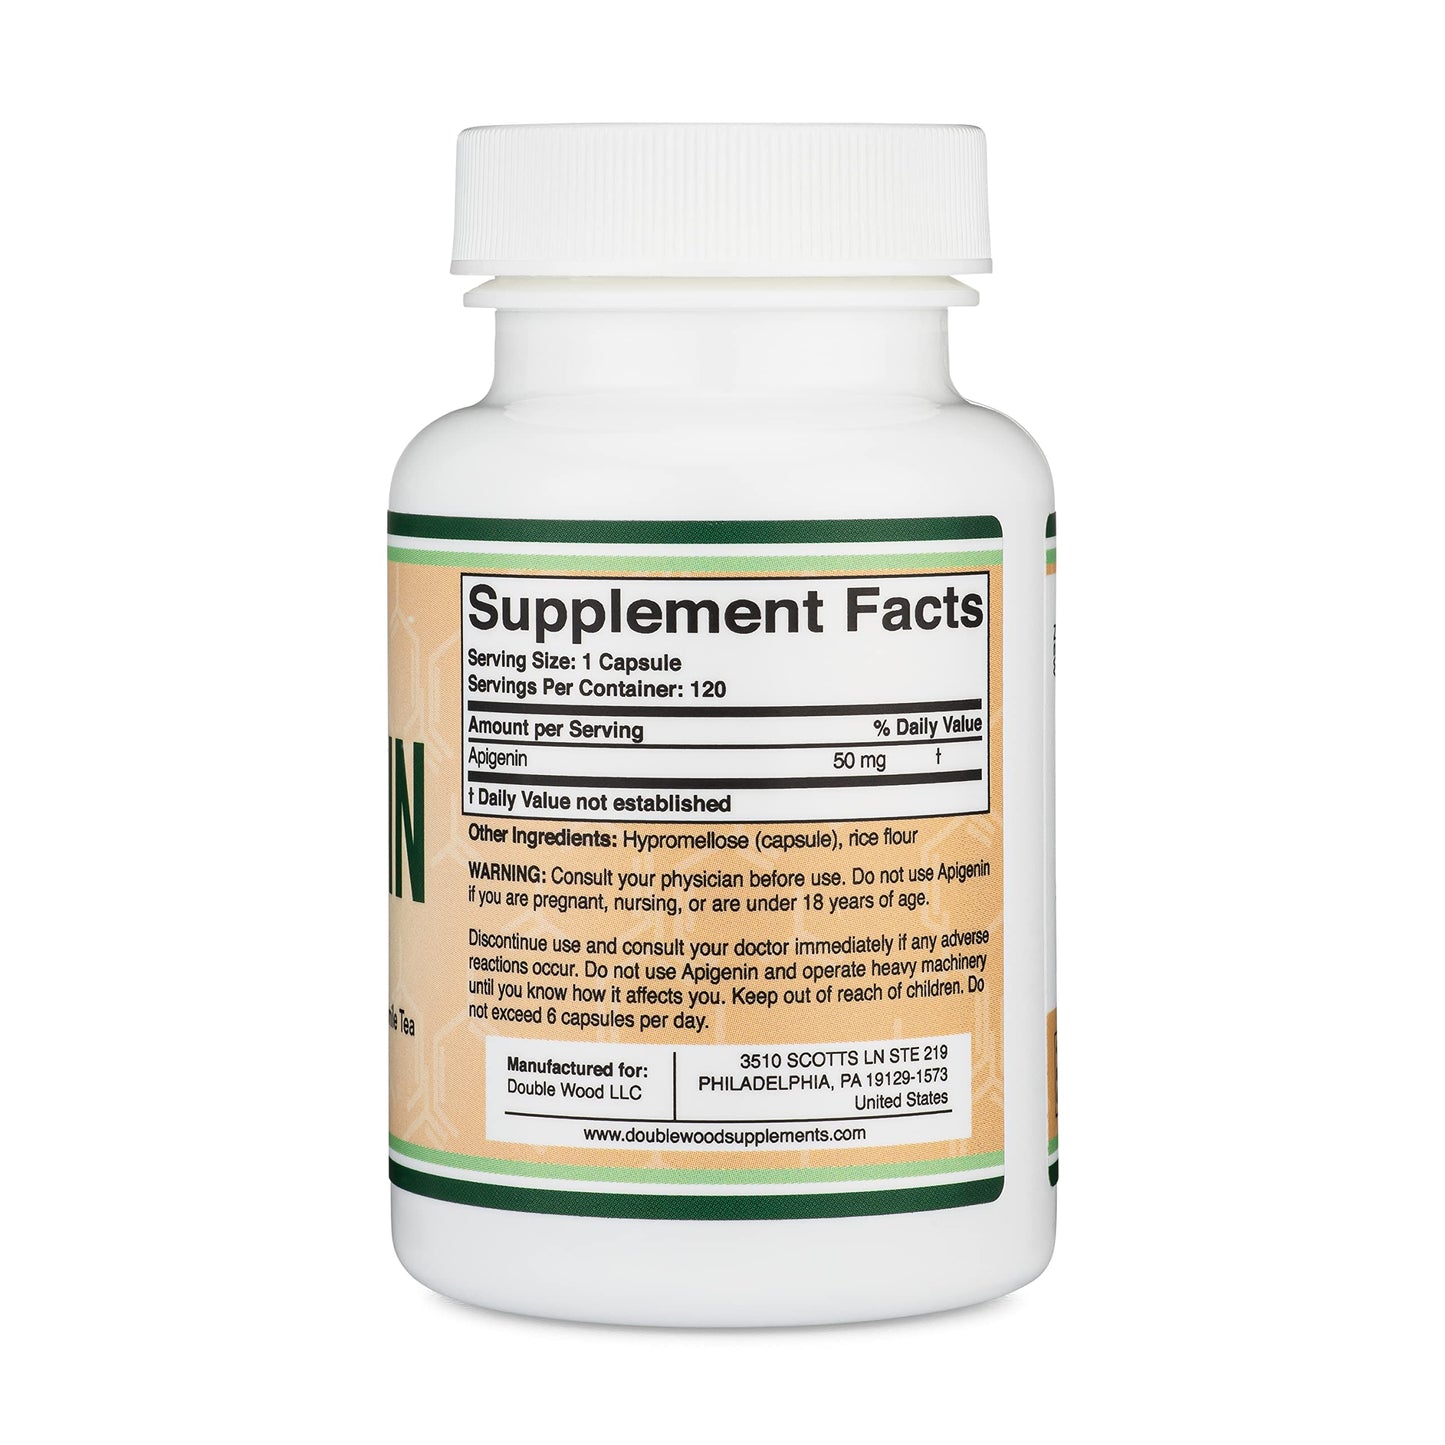 Apigenin Supplement - 50mg per Capsule, 120 Count by Double Wood Supplements